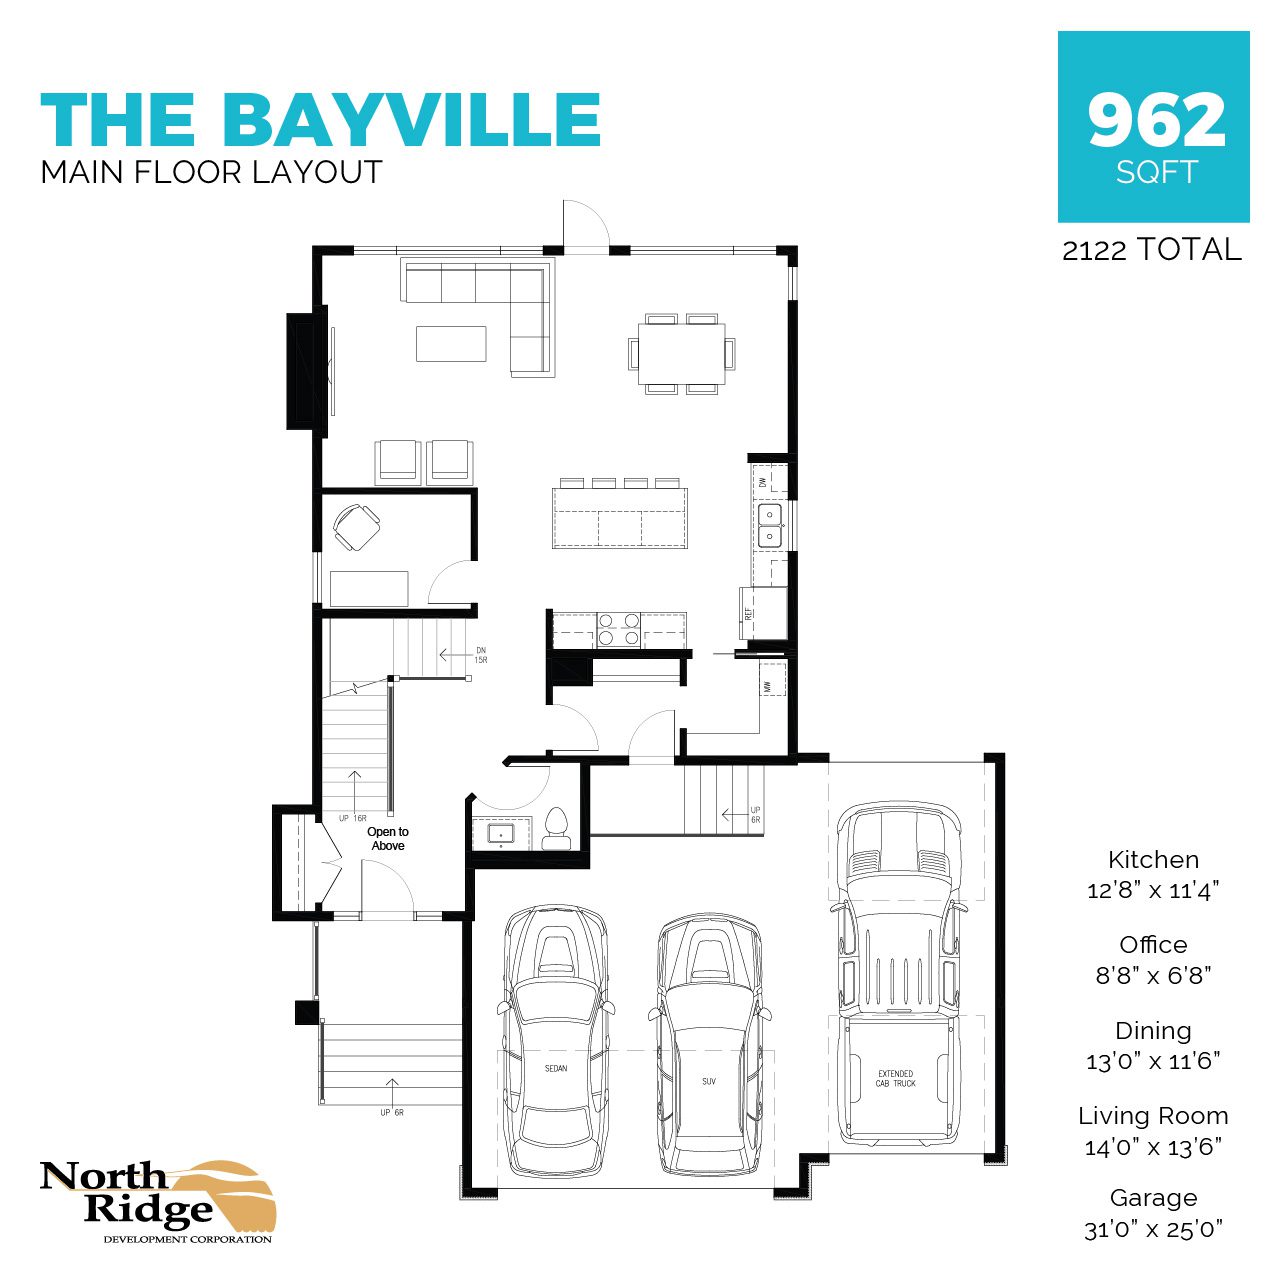 Shows main floor layout with open concept floorplan with kitchen, dining, living room, office, powder room, pantry and mudroom with triple-car garage.